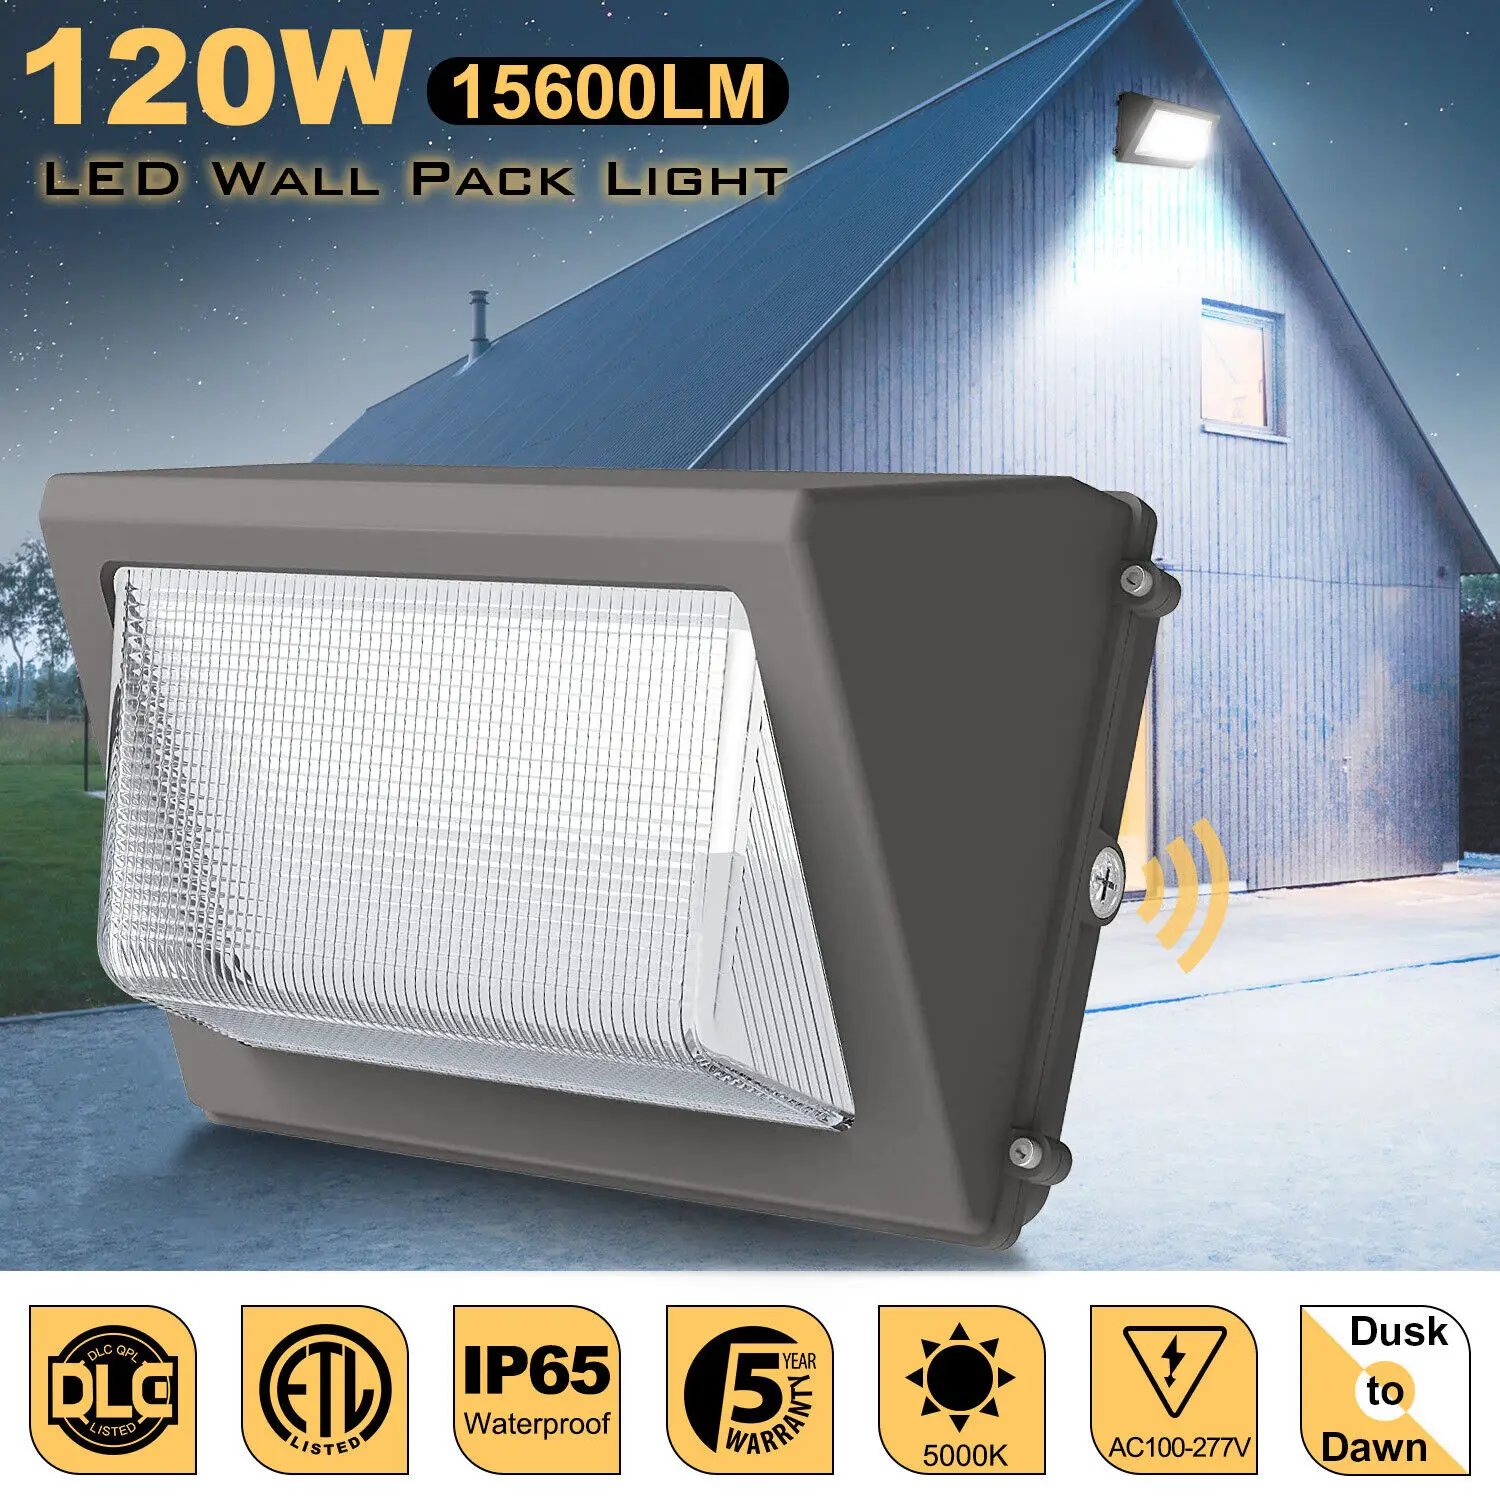 

120W LED Wall Pack with Photocell Outdoor ETL 120-277V 5000K 15600LM IP65 Wallpack Glass Cover Waterproof Dusk to Dawn Lighting